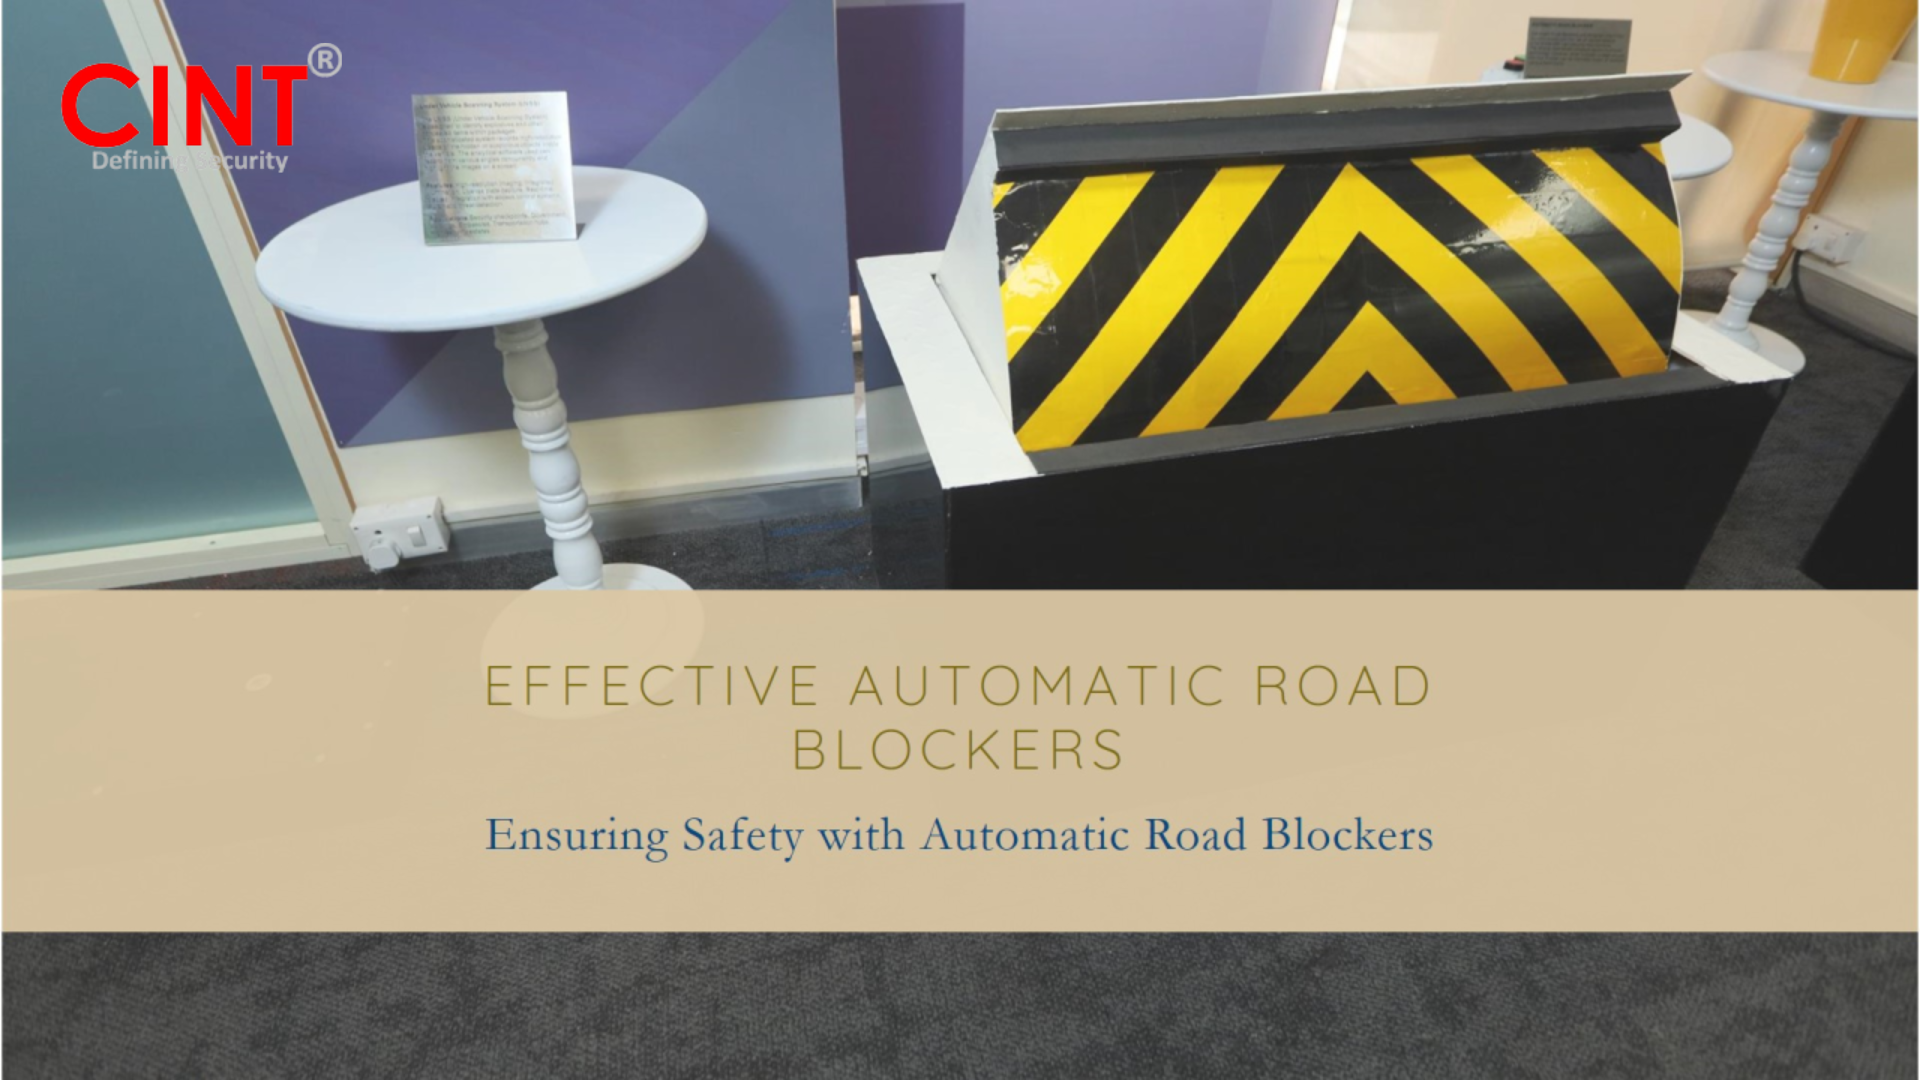 Automatic Road Blocker: Ensuring Safety with Effective Automatic Road Blockers